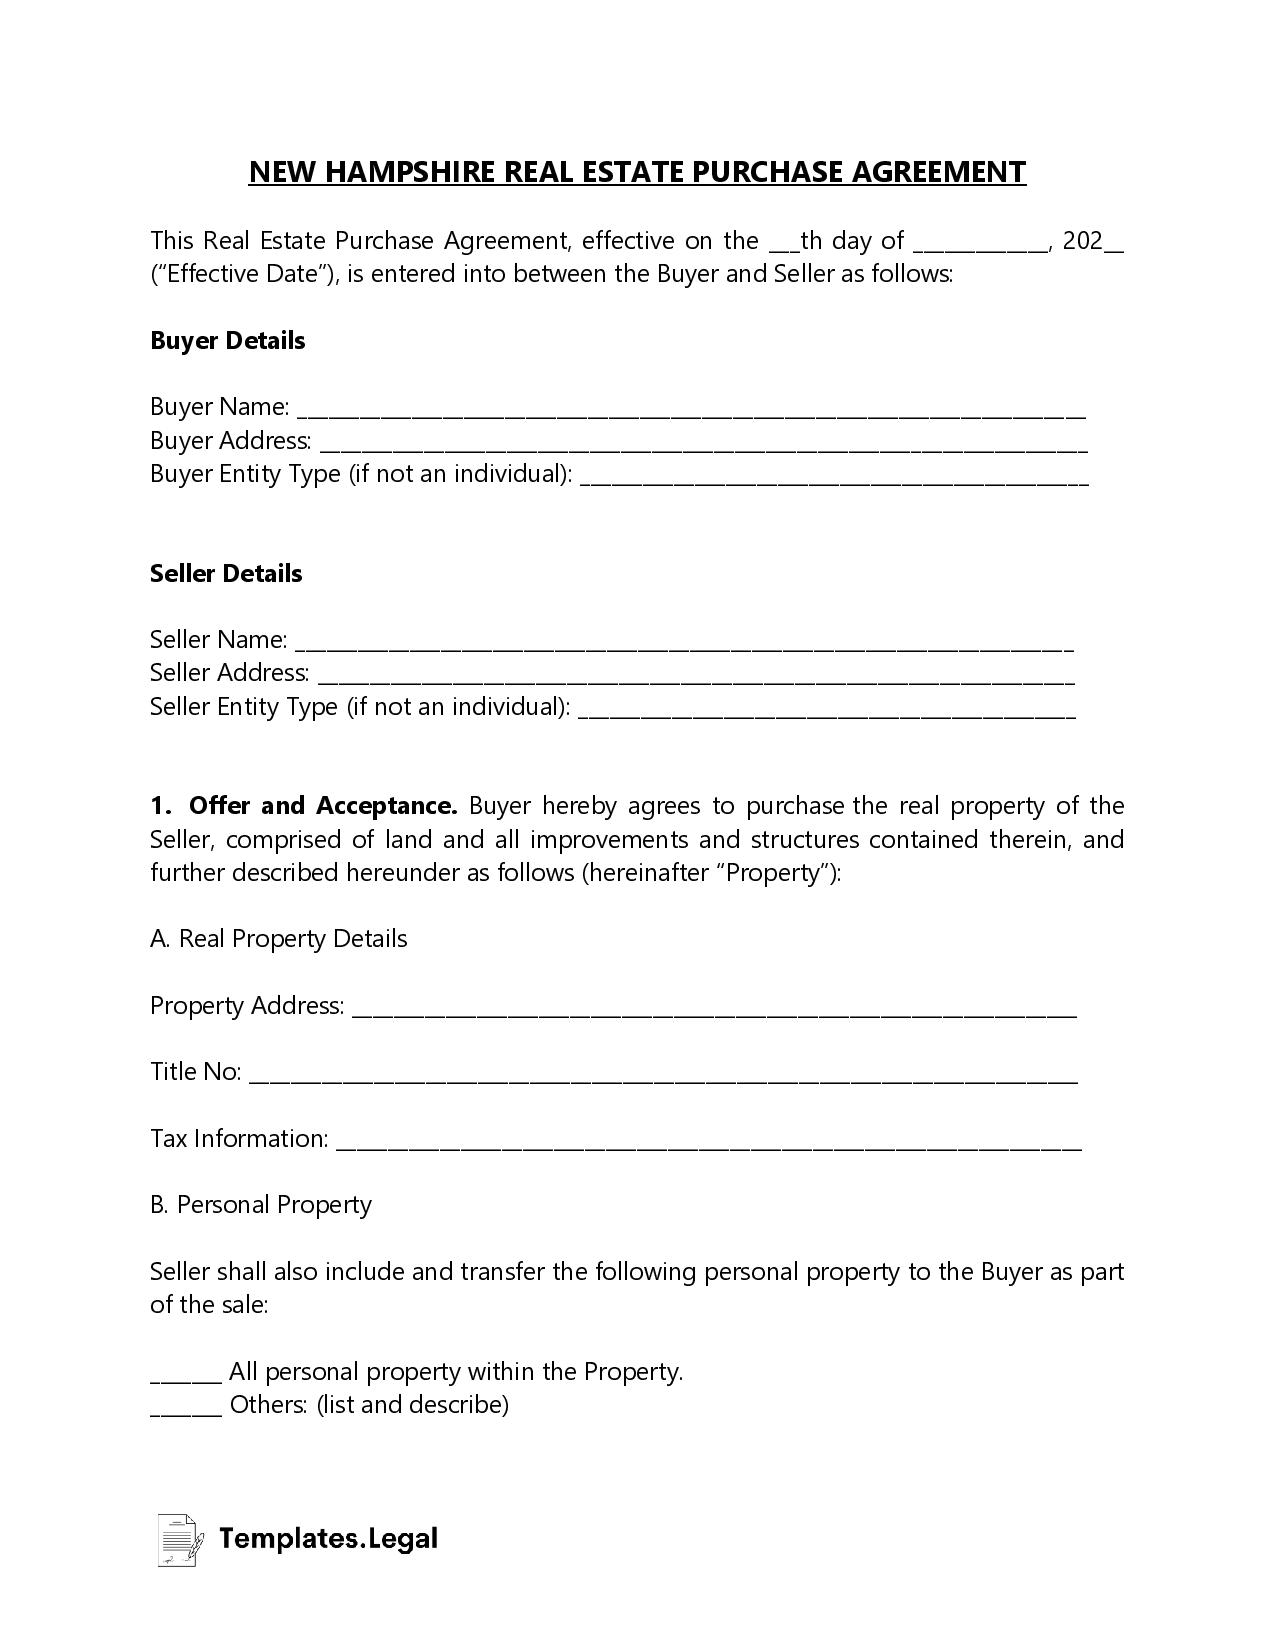 New Hampshire Real Estate Purchase Agreement - Templates.Legal